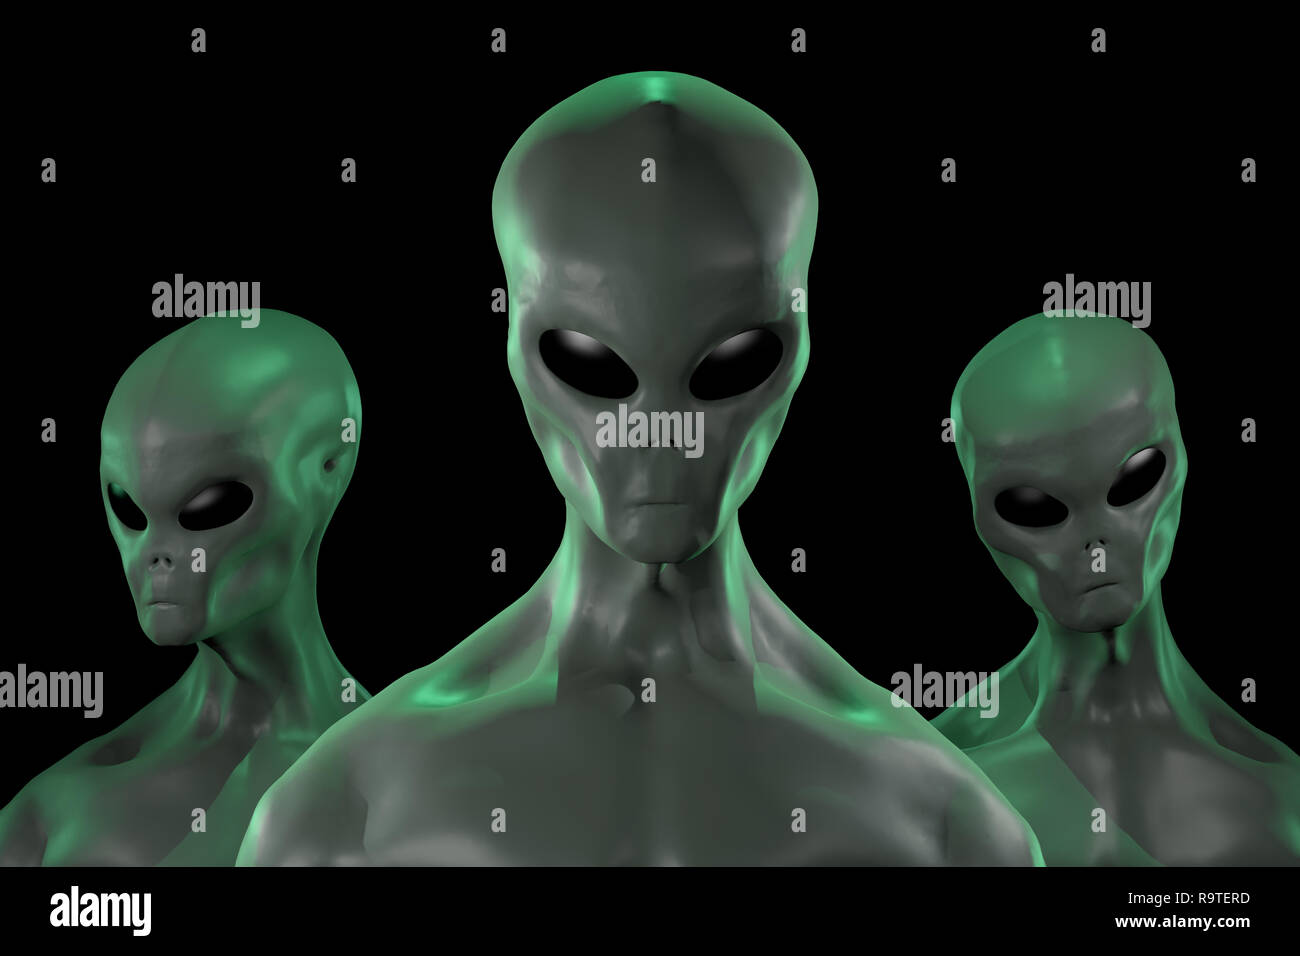 A 3D rendered image of a group of humanoid alien creatures isolated on black background Stock Photo